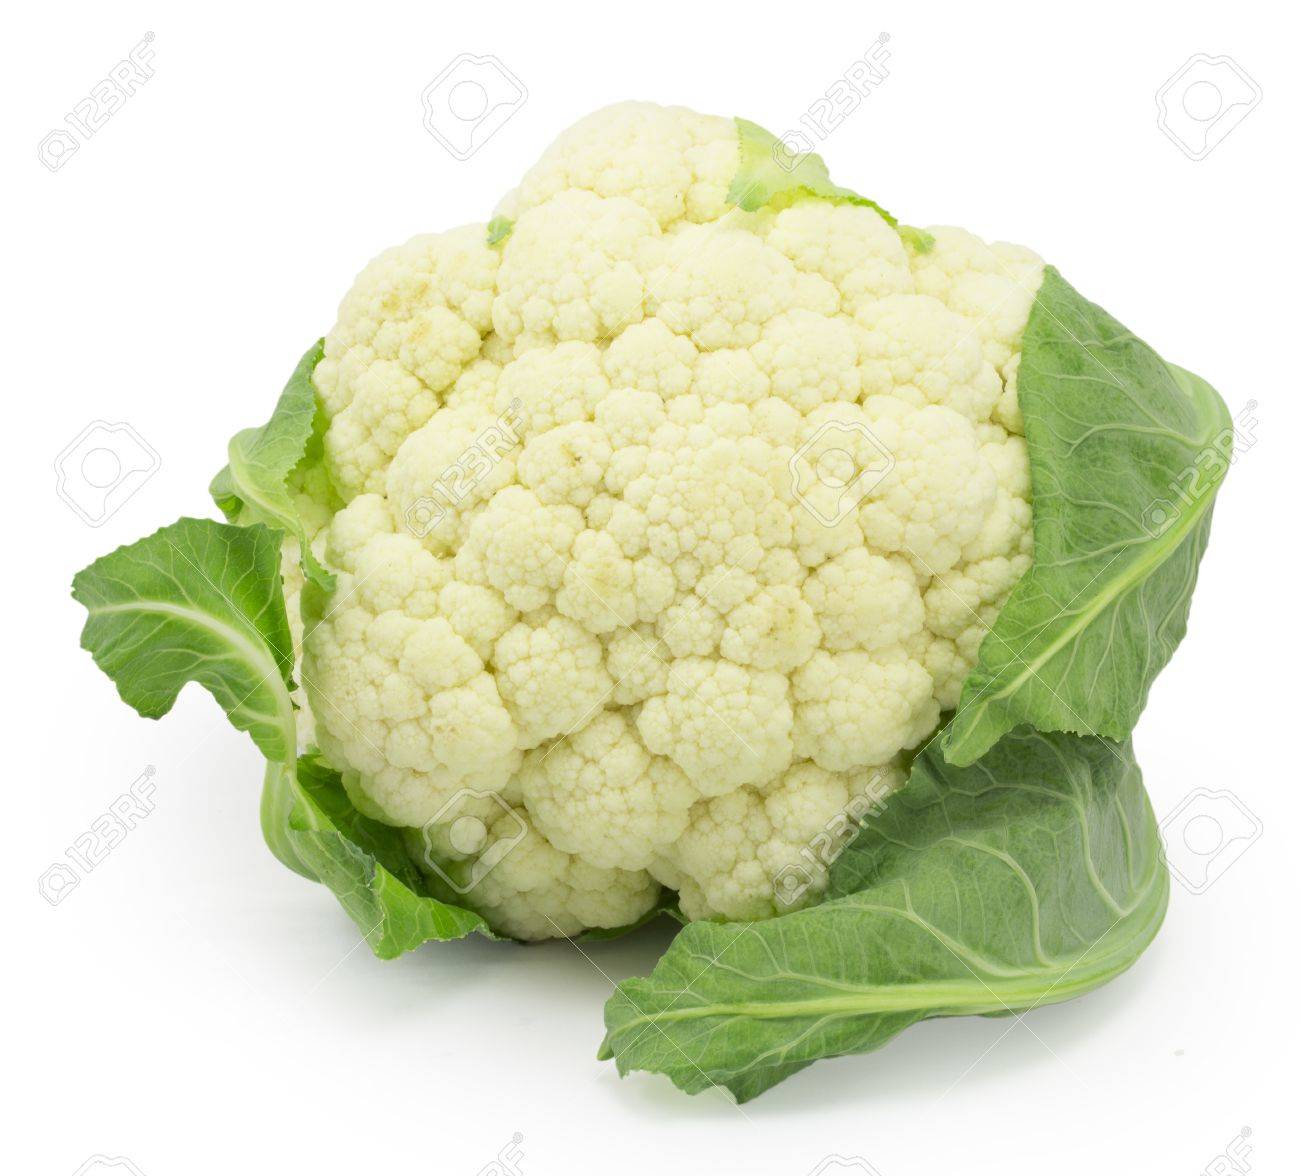 Still Life Cauliflower On A White Background Stock Photo Picture